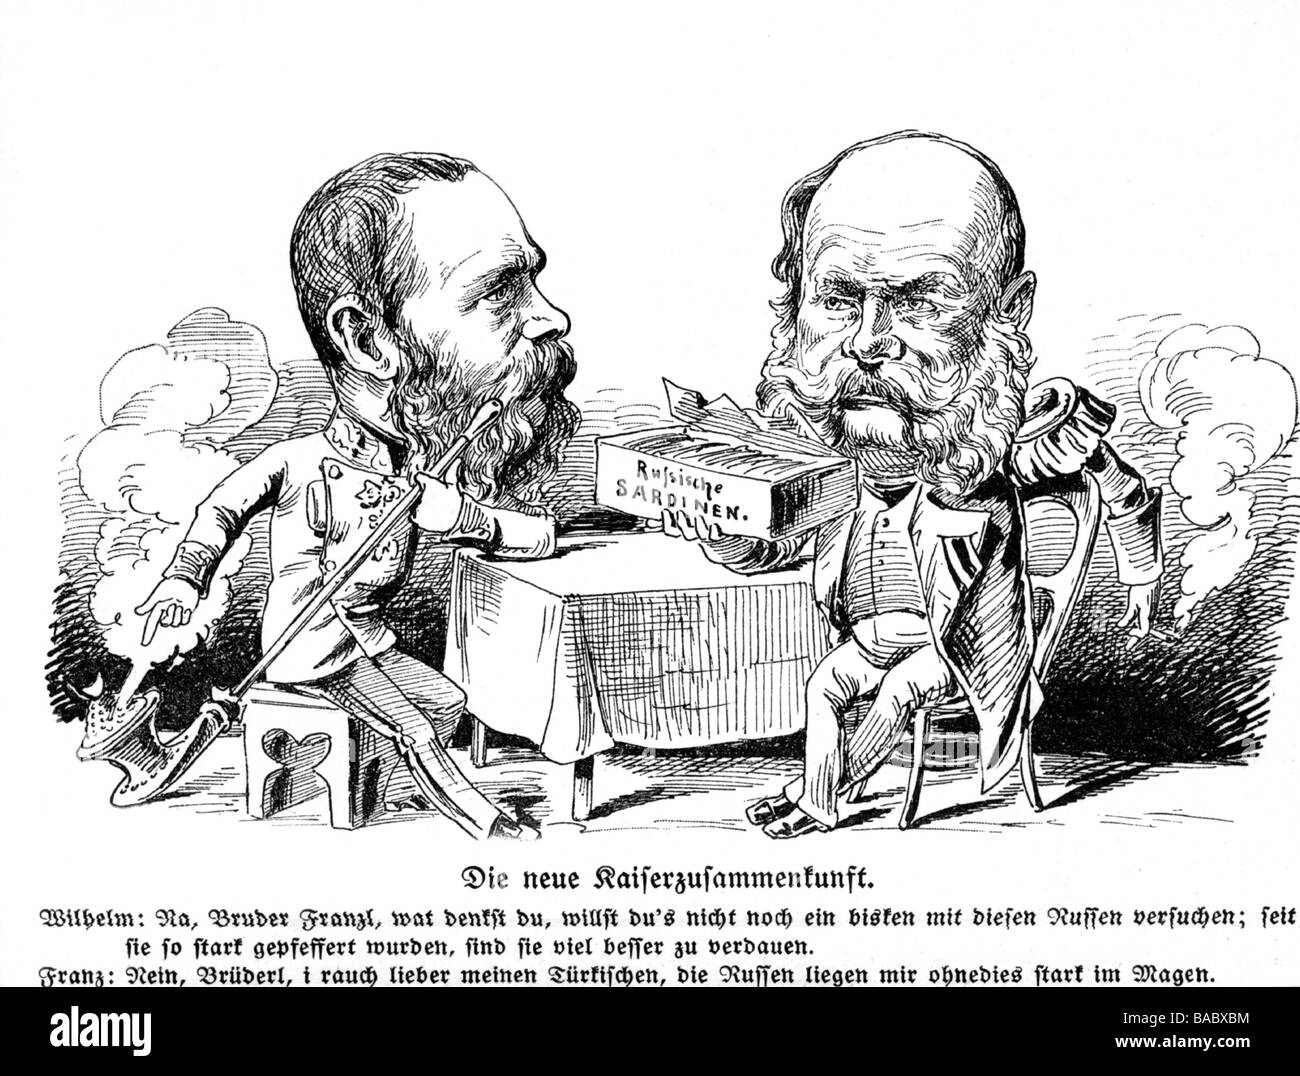 Franz Joseph I, 18.8.1830 - 21.11.1916, Emperor of Austria since 1848, smoking with Emperor Wilhelm I, Swiss caricature 'The latest meeting of the emperors', from 'Nebelspalter', 1877, Stock Photo